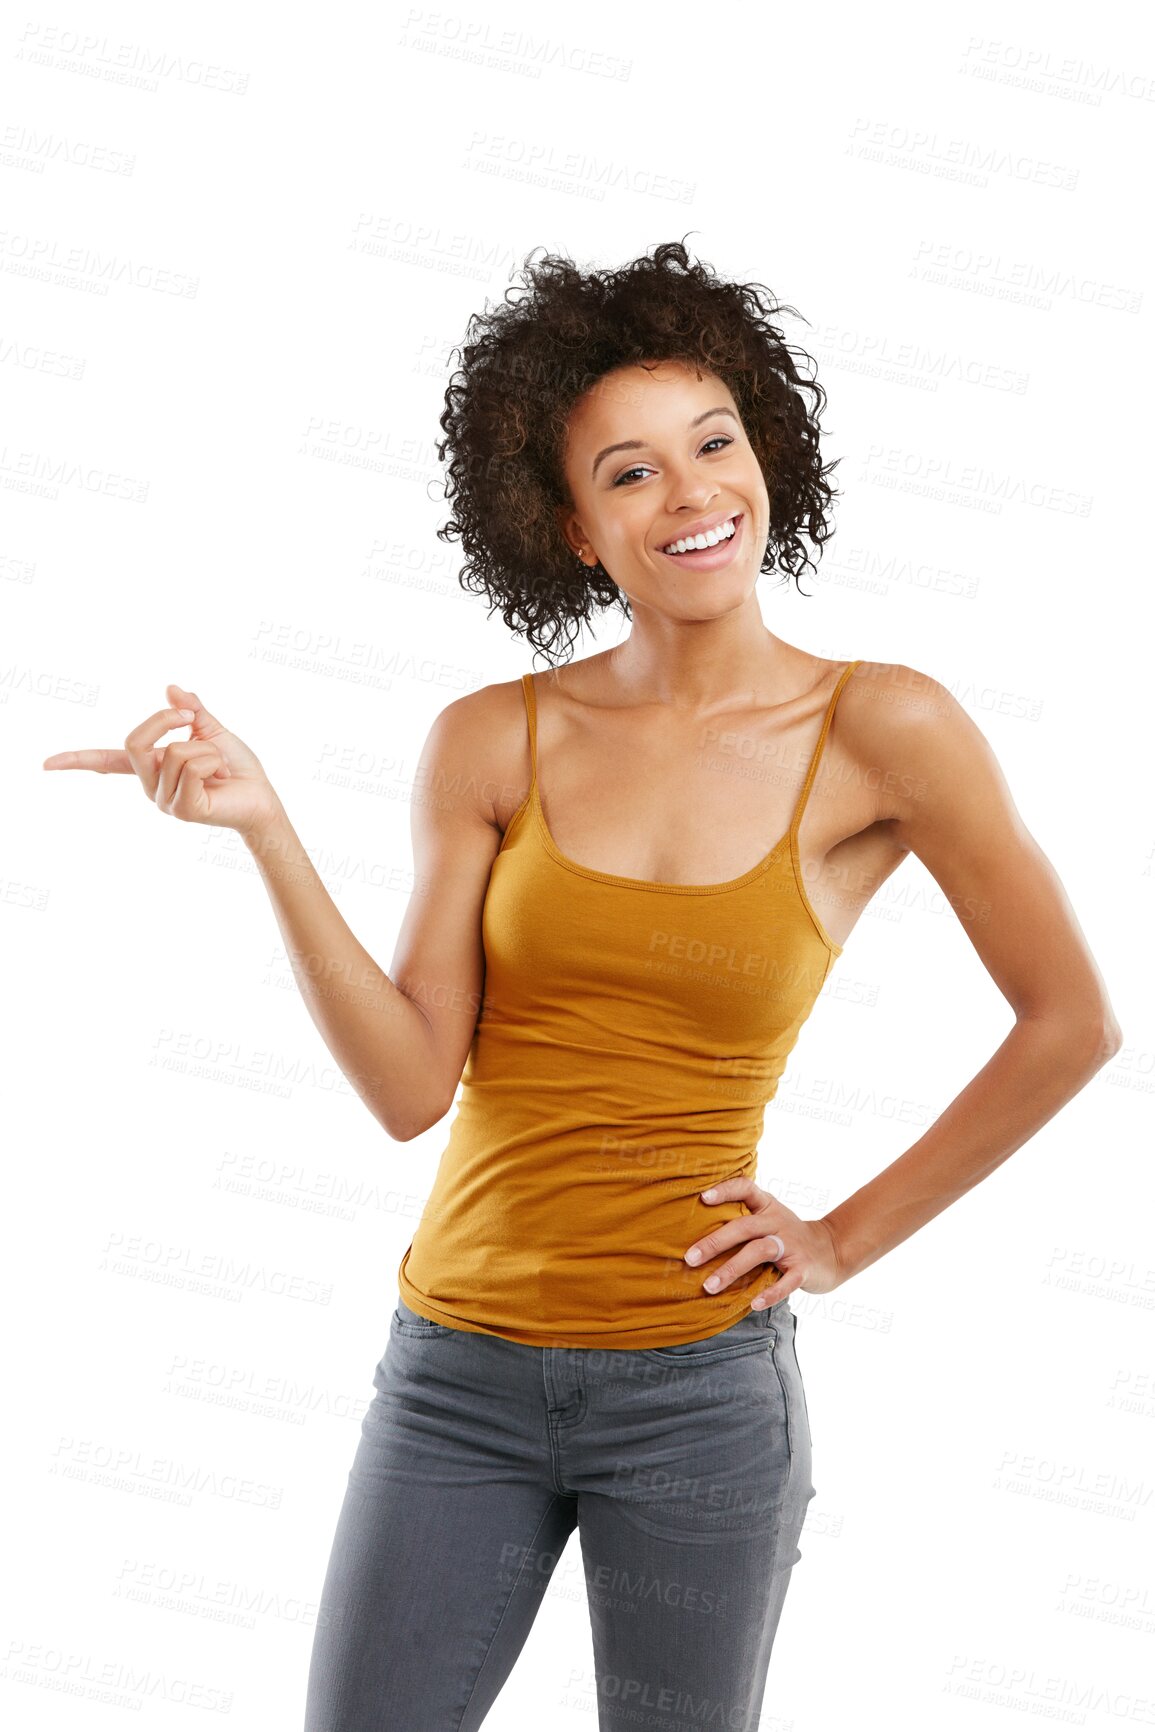 Buy stock photo Happy, portrait and a pointing woman for advertising isolated on a transparent png background. Smile, young and a brand manager with a gesture for promotion, marketing or showing for branding